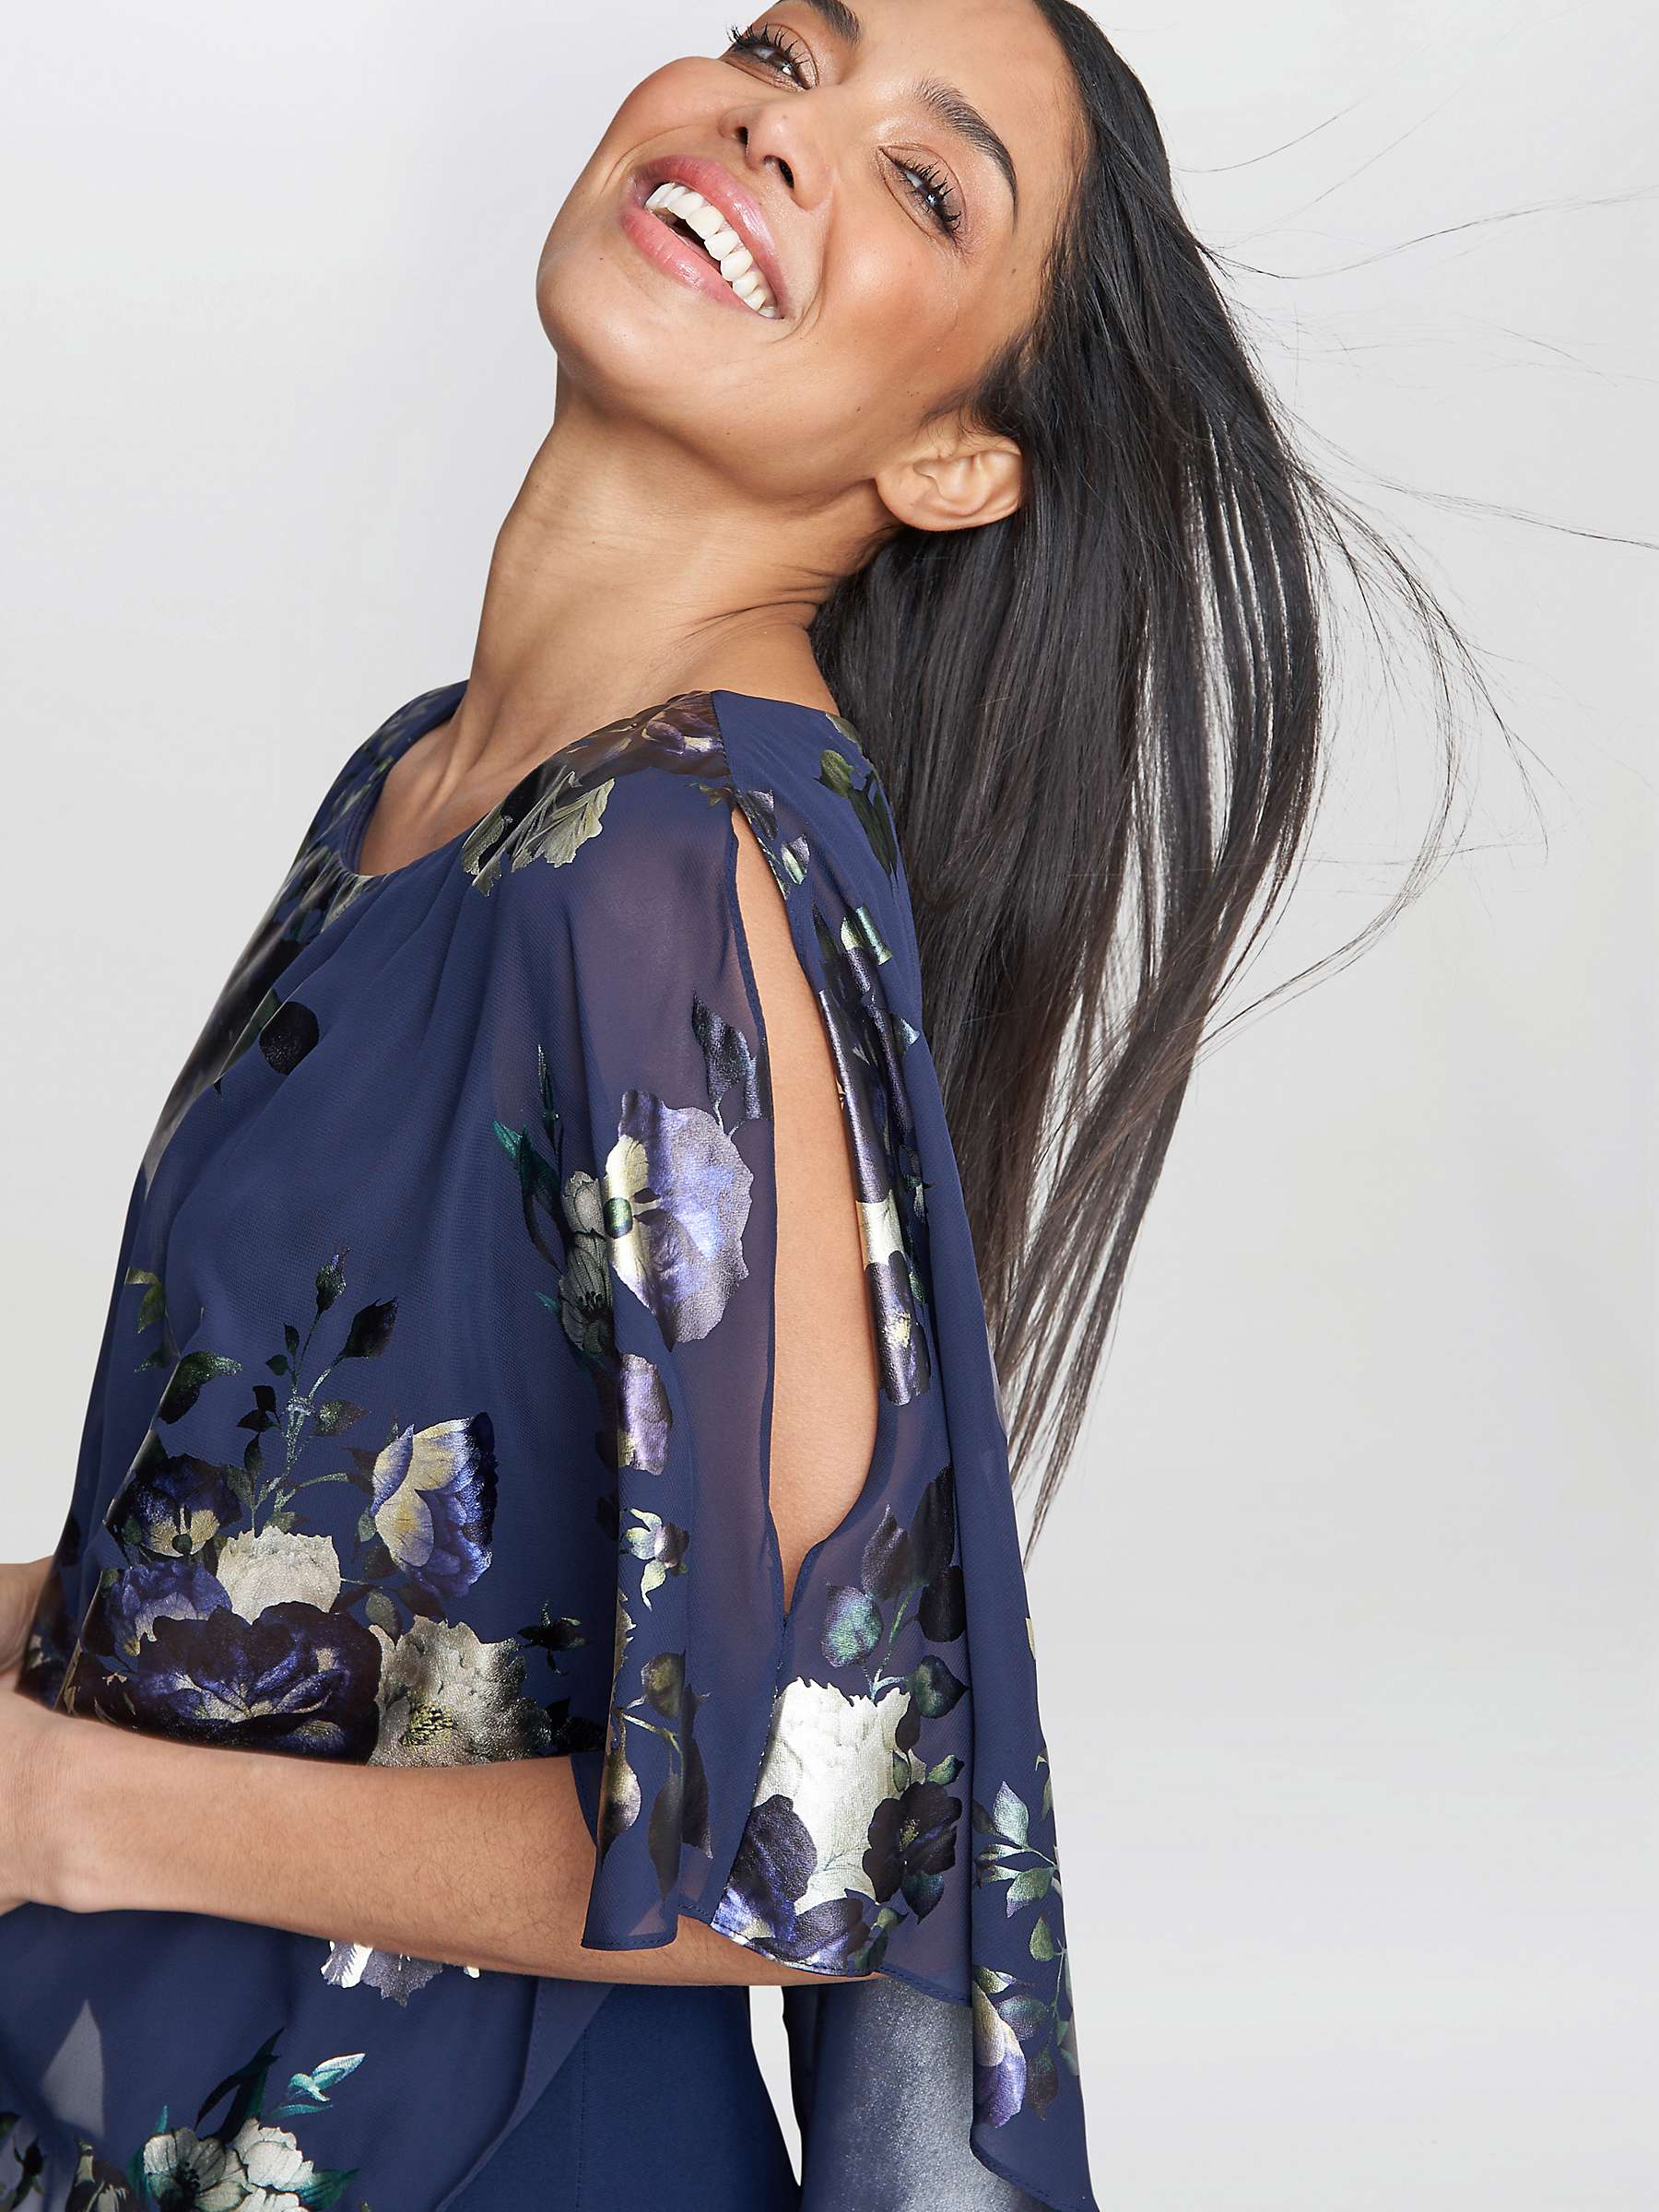 Buy Gina Bacconi Gaby Floral Print Asymmetric Cape Dress, Navy/Multi Online at johnlewis.com